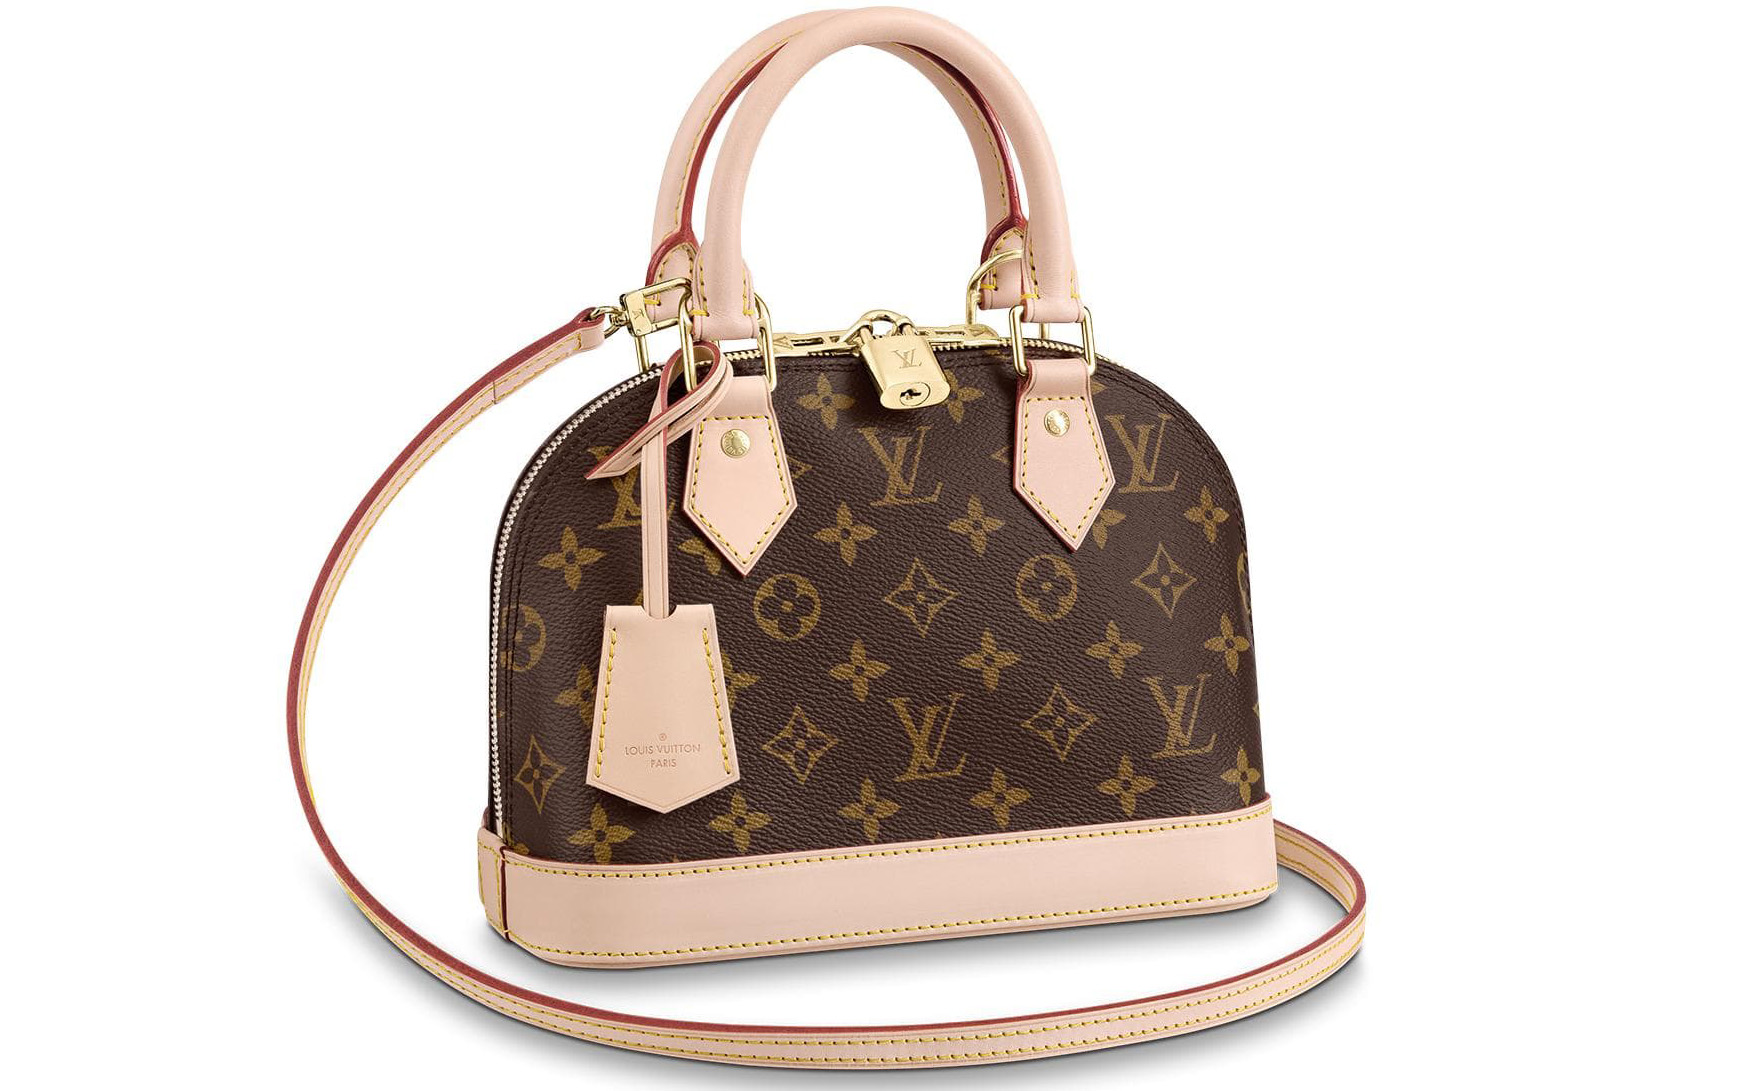 Louis Vuitton Alma BB Epi leather full review + wear and tear + WFIMB!! 